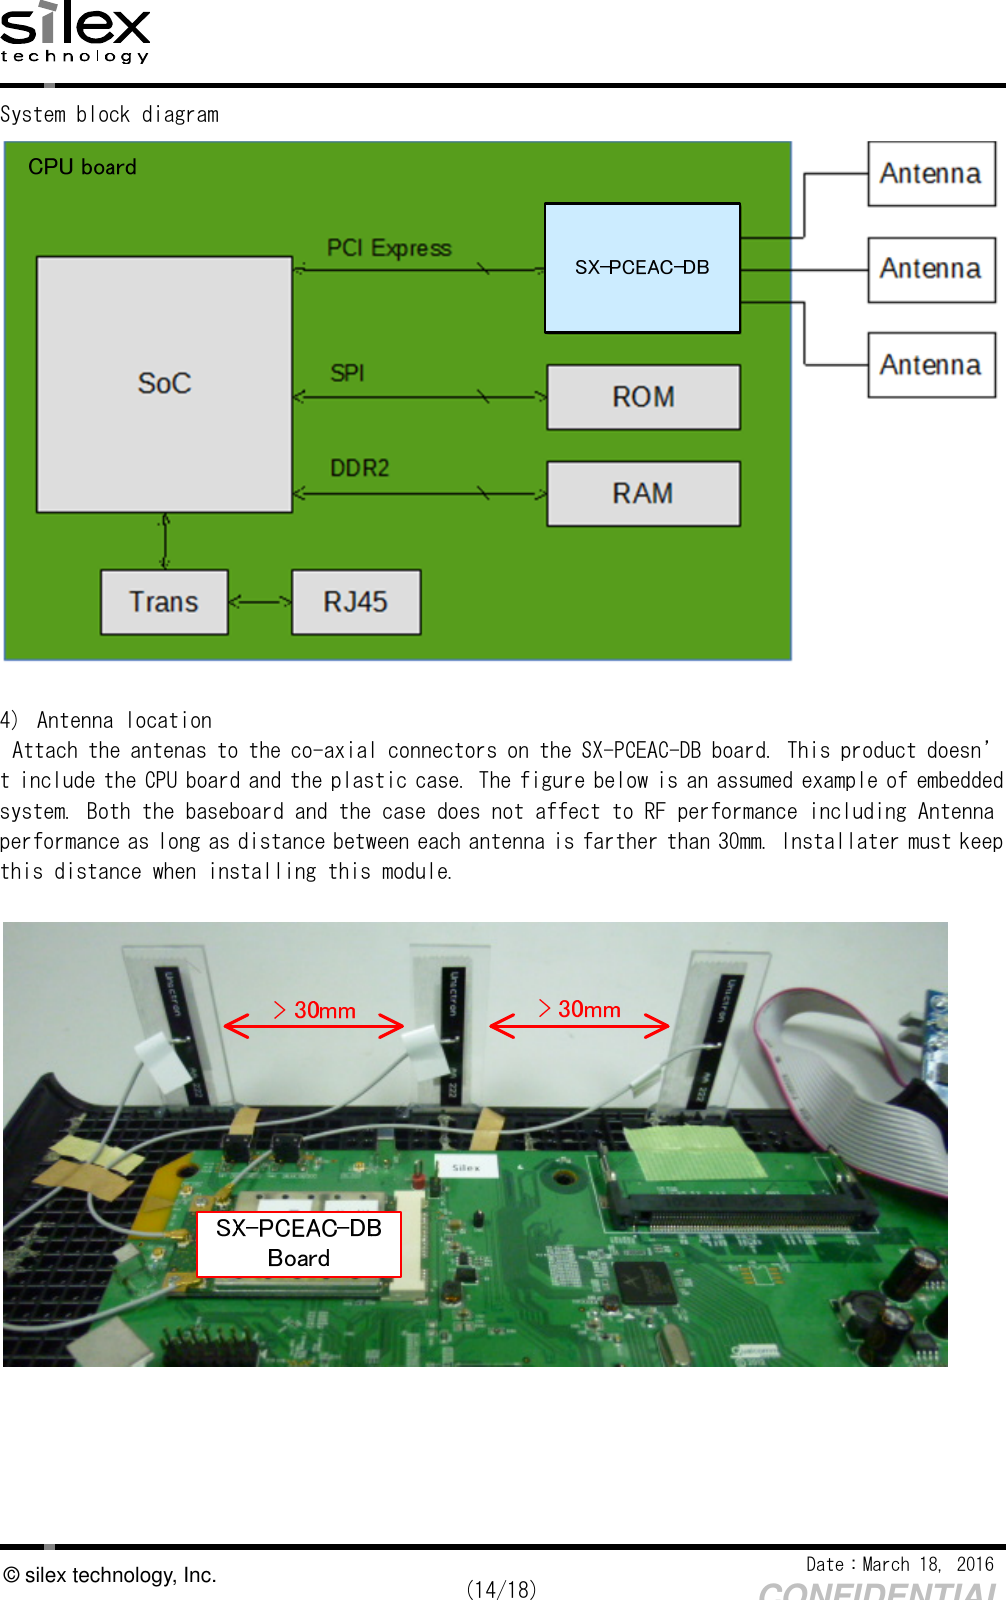    Date：March 18, 2016  (14/18) CONFIDENTIAL © silex technology, Inc. System block diagram   4) Antenna location  Attach the antenas to the co-axial connectors on the SX-PCEAC-DB board. This product doesn’t include the CPU board and the plastic case. The figure below is an assumed example of embedded system. Both the baseboard and the case does not affect to RF performance including Antenna performance as long as distance between each antenna is farther than 30mm. Installater must keep this distance when installing this module.        